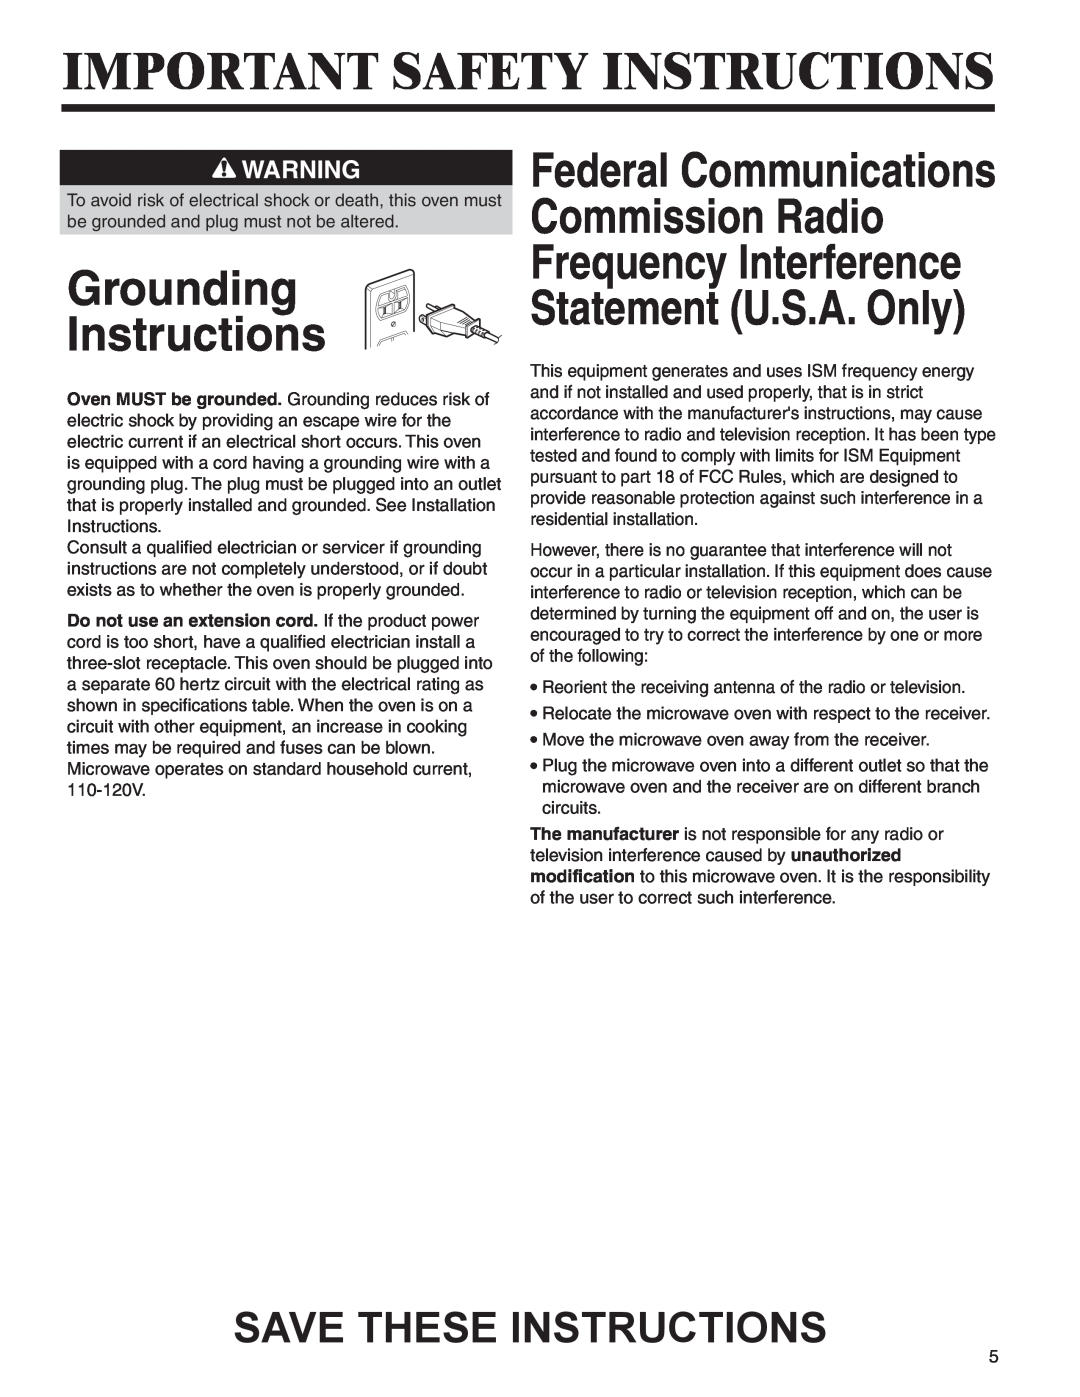 Amana AMC6158BCB Federal Communications, Important Safety Instructions, Grounding Instructions, Statement U.S.A. Only 